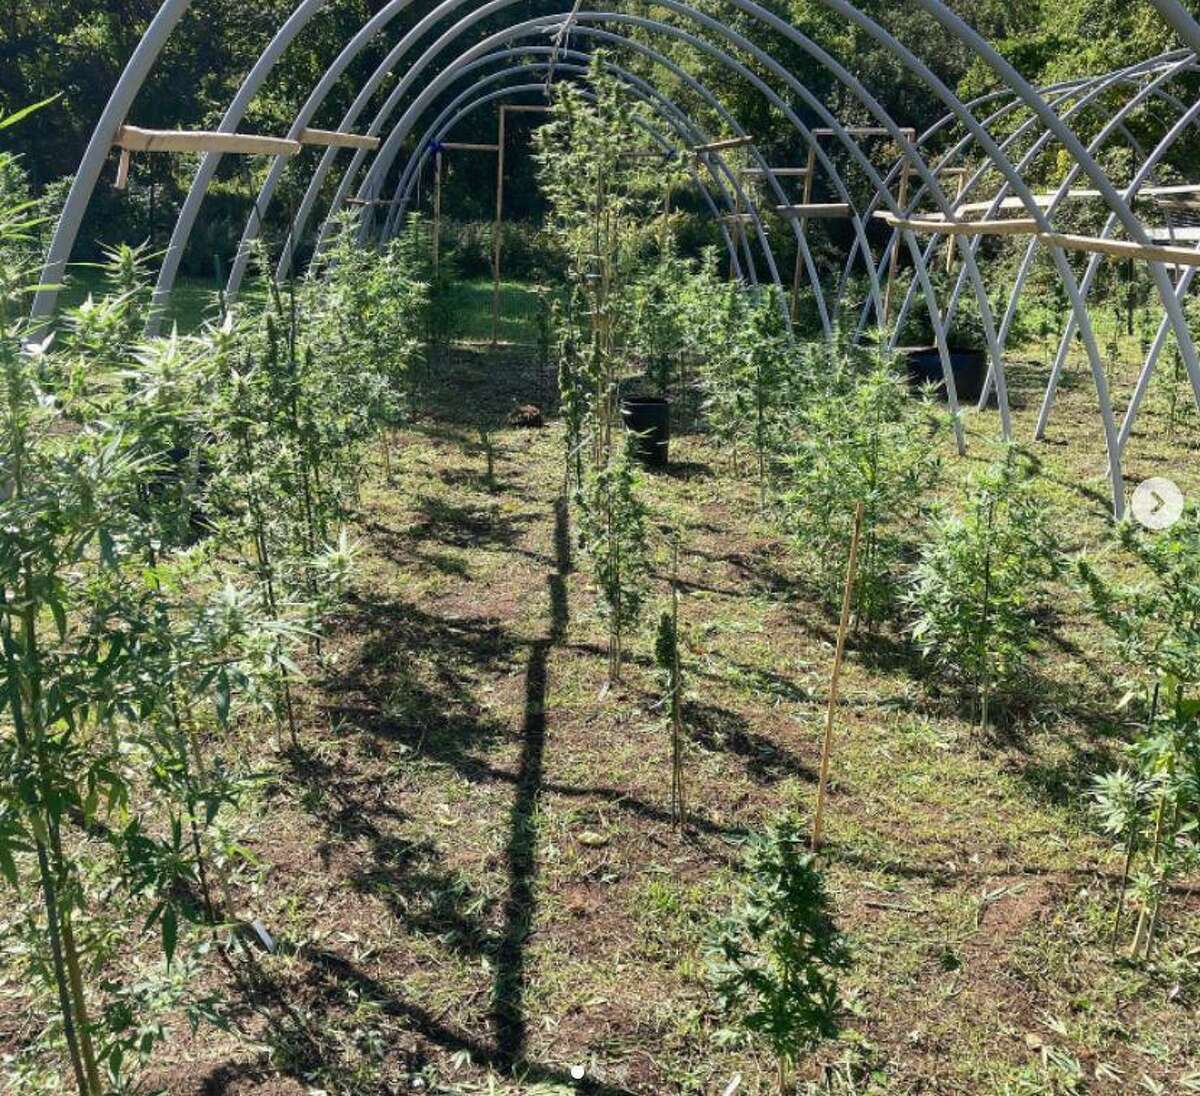 Easton Grows cannabis plants at the South Park Avenue property in town.